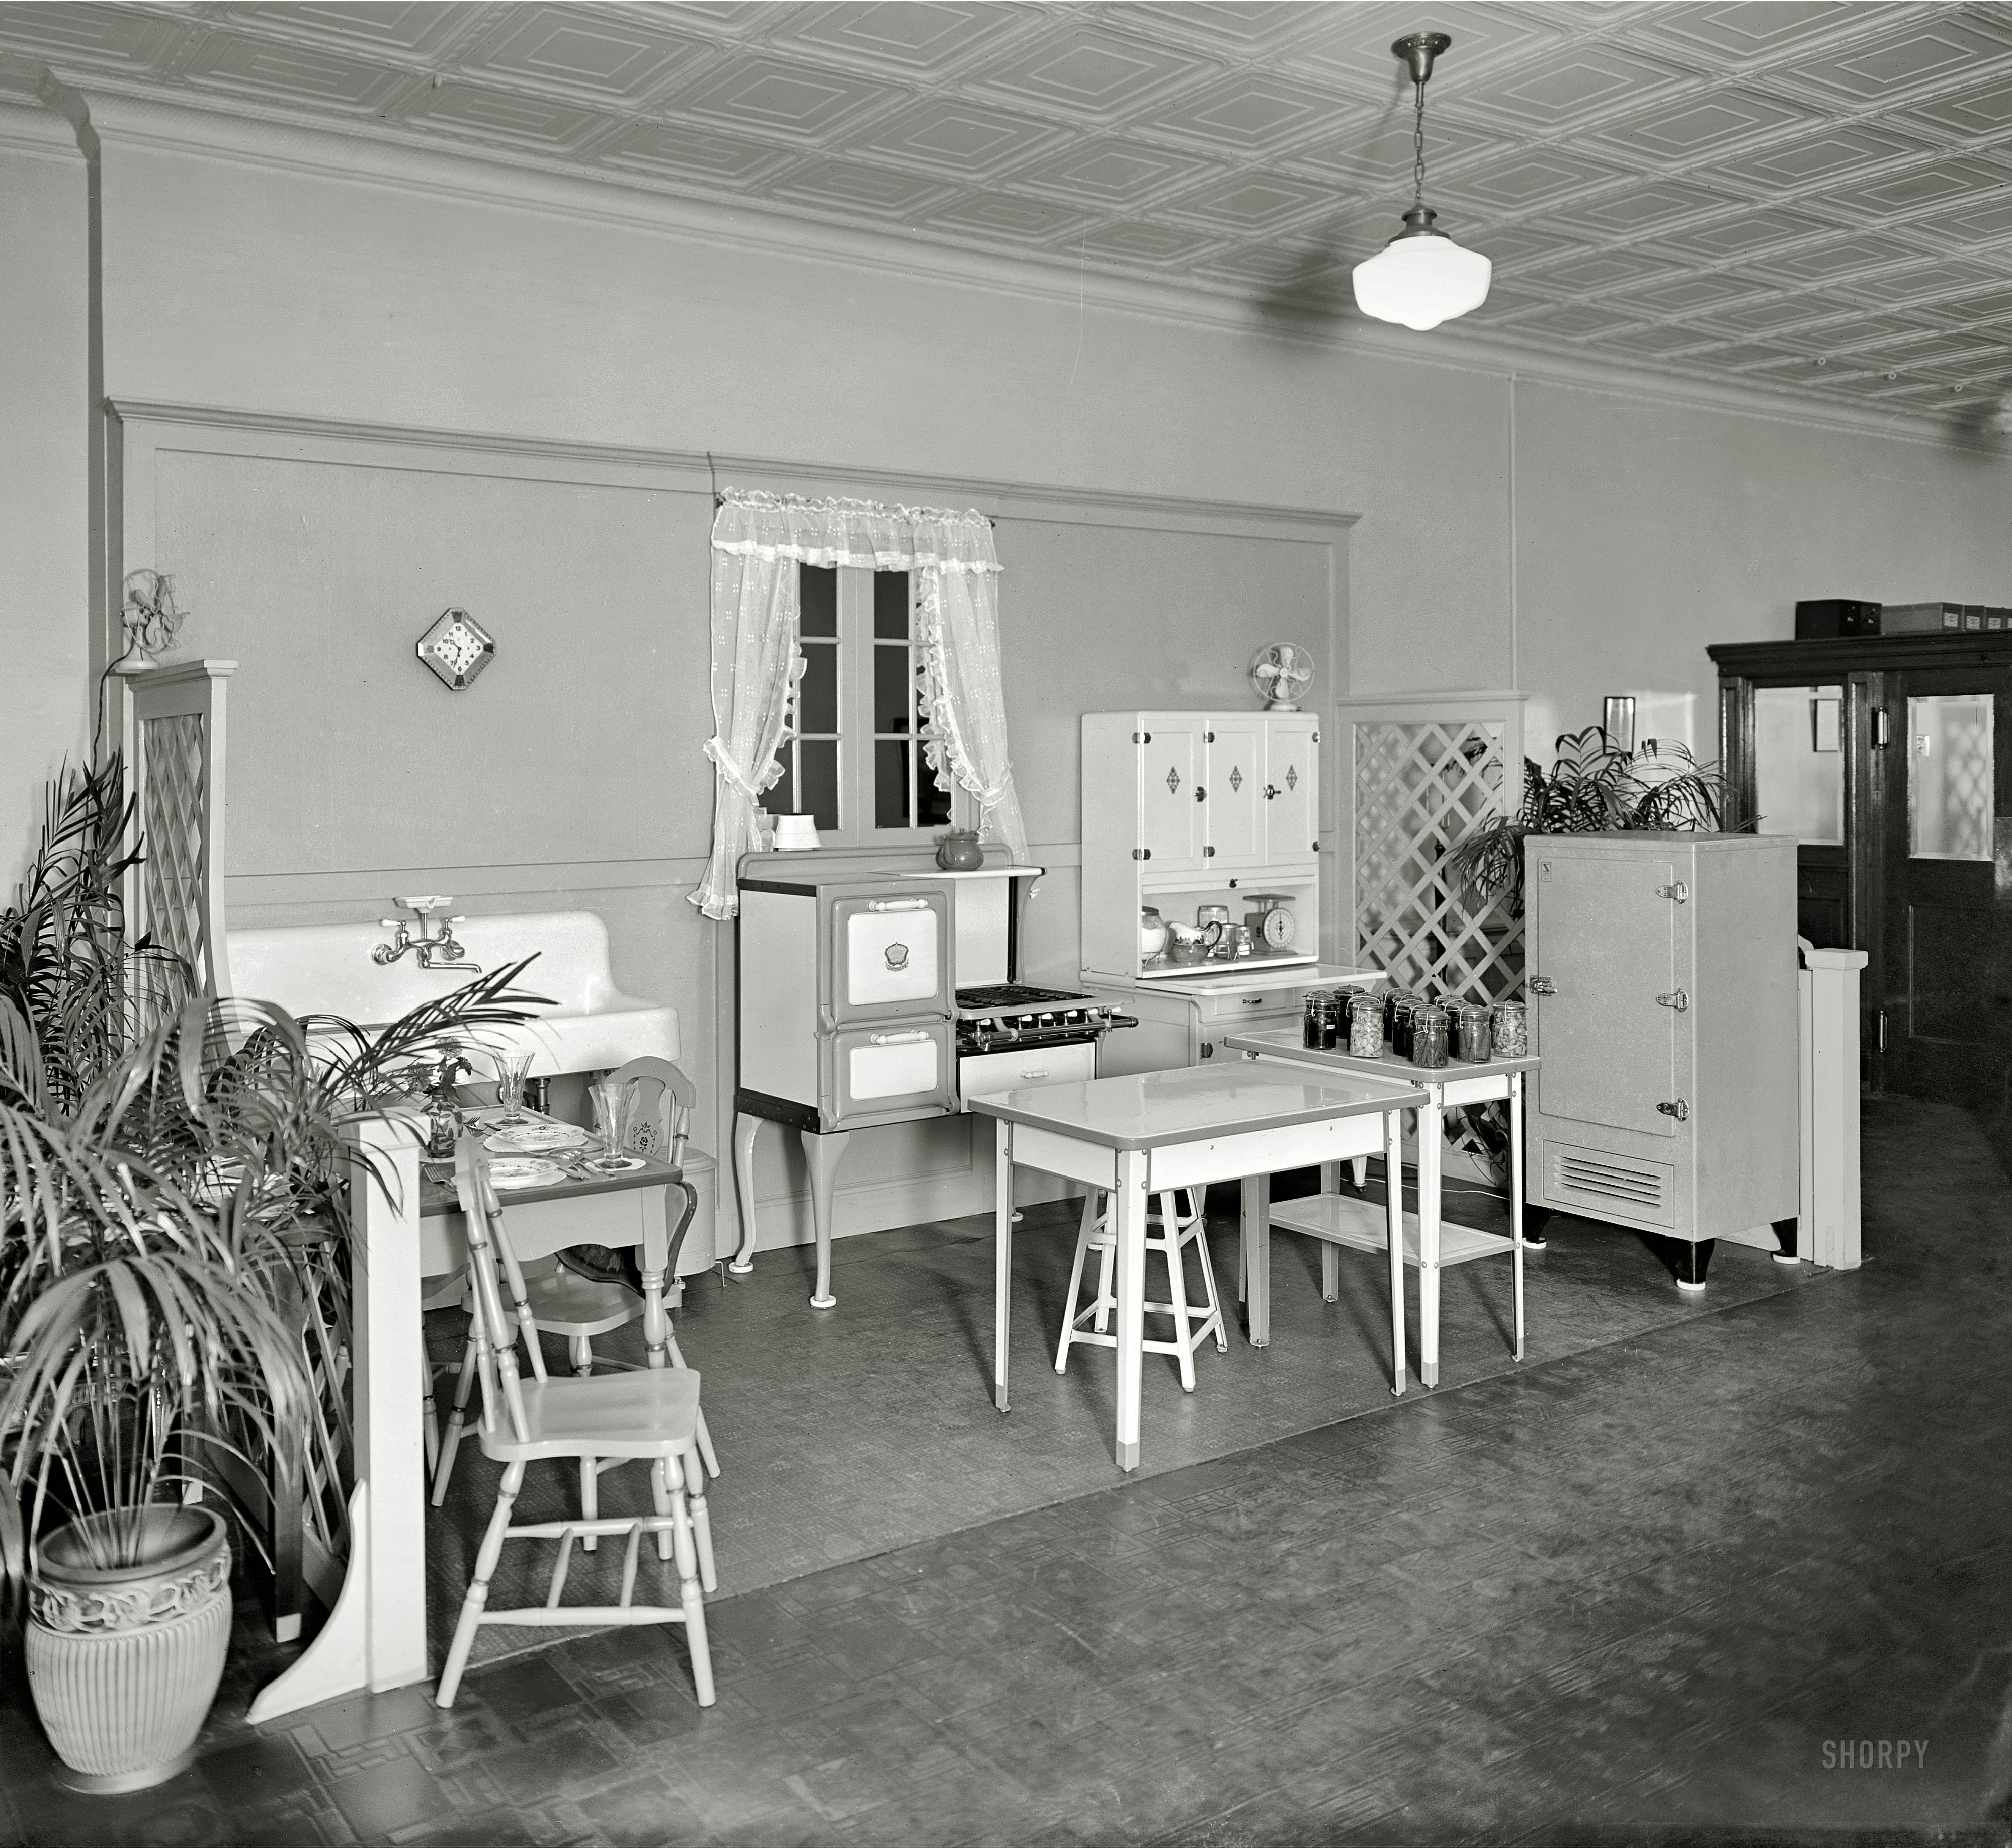 "Woodward & Lothrop kitchen." A display at the Washington, D.C., department store circa 1926. National Photo Co. Collection glass negative. View full size.